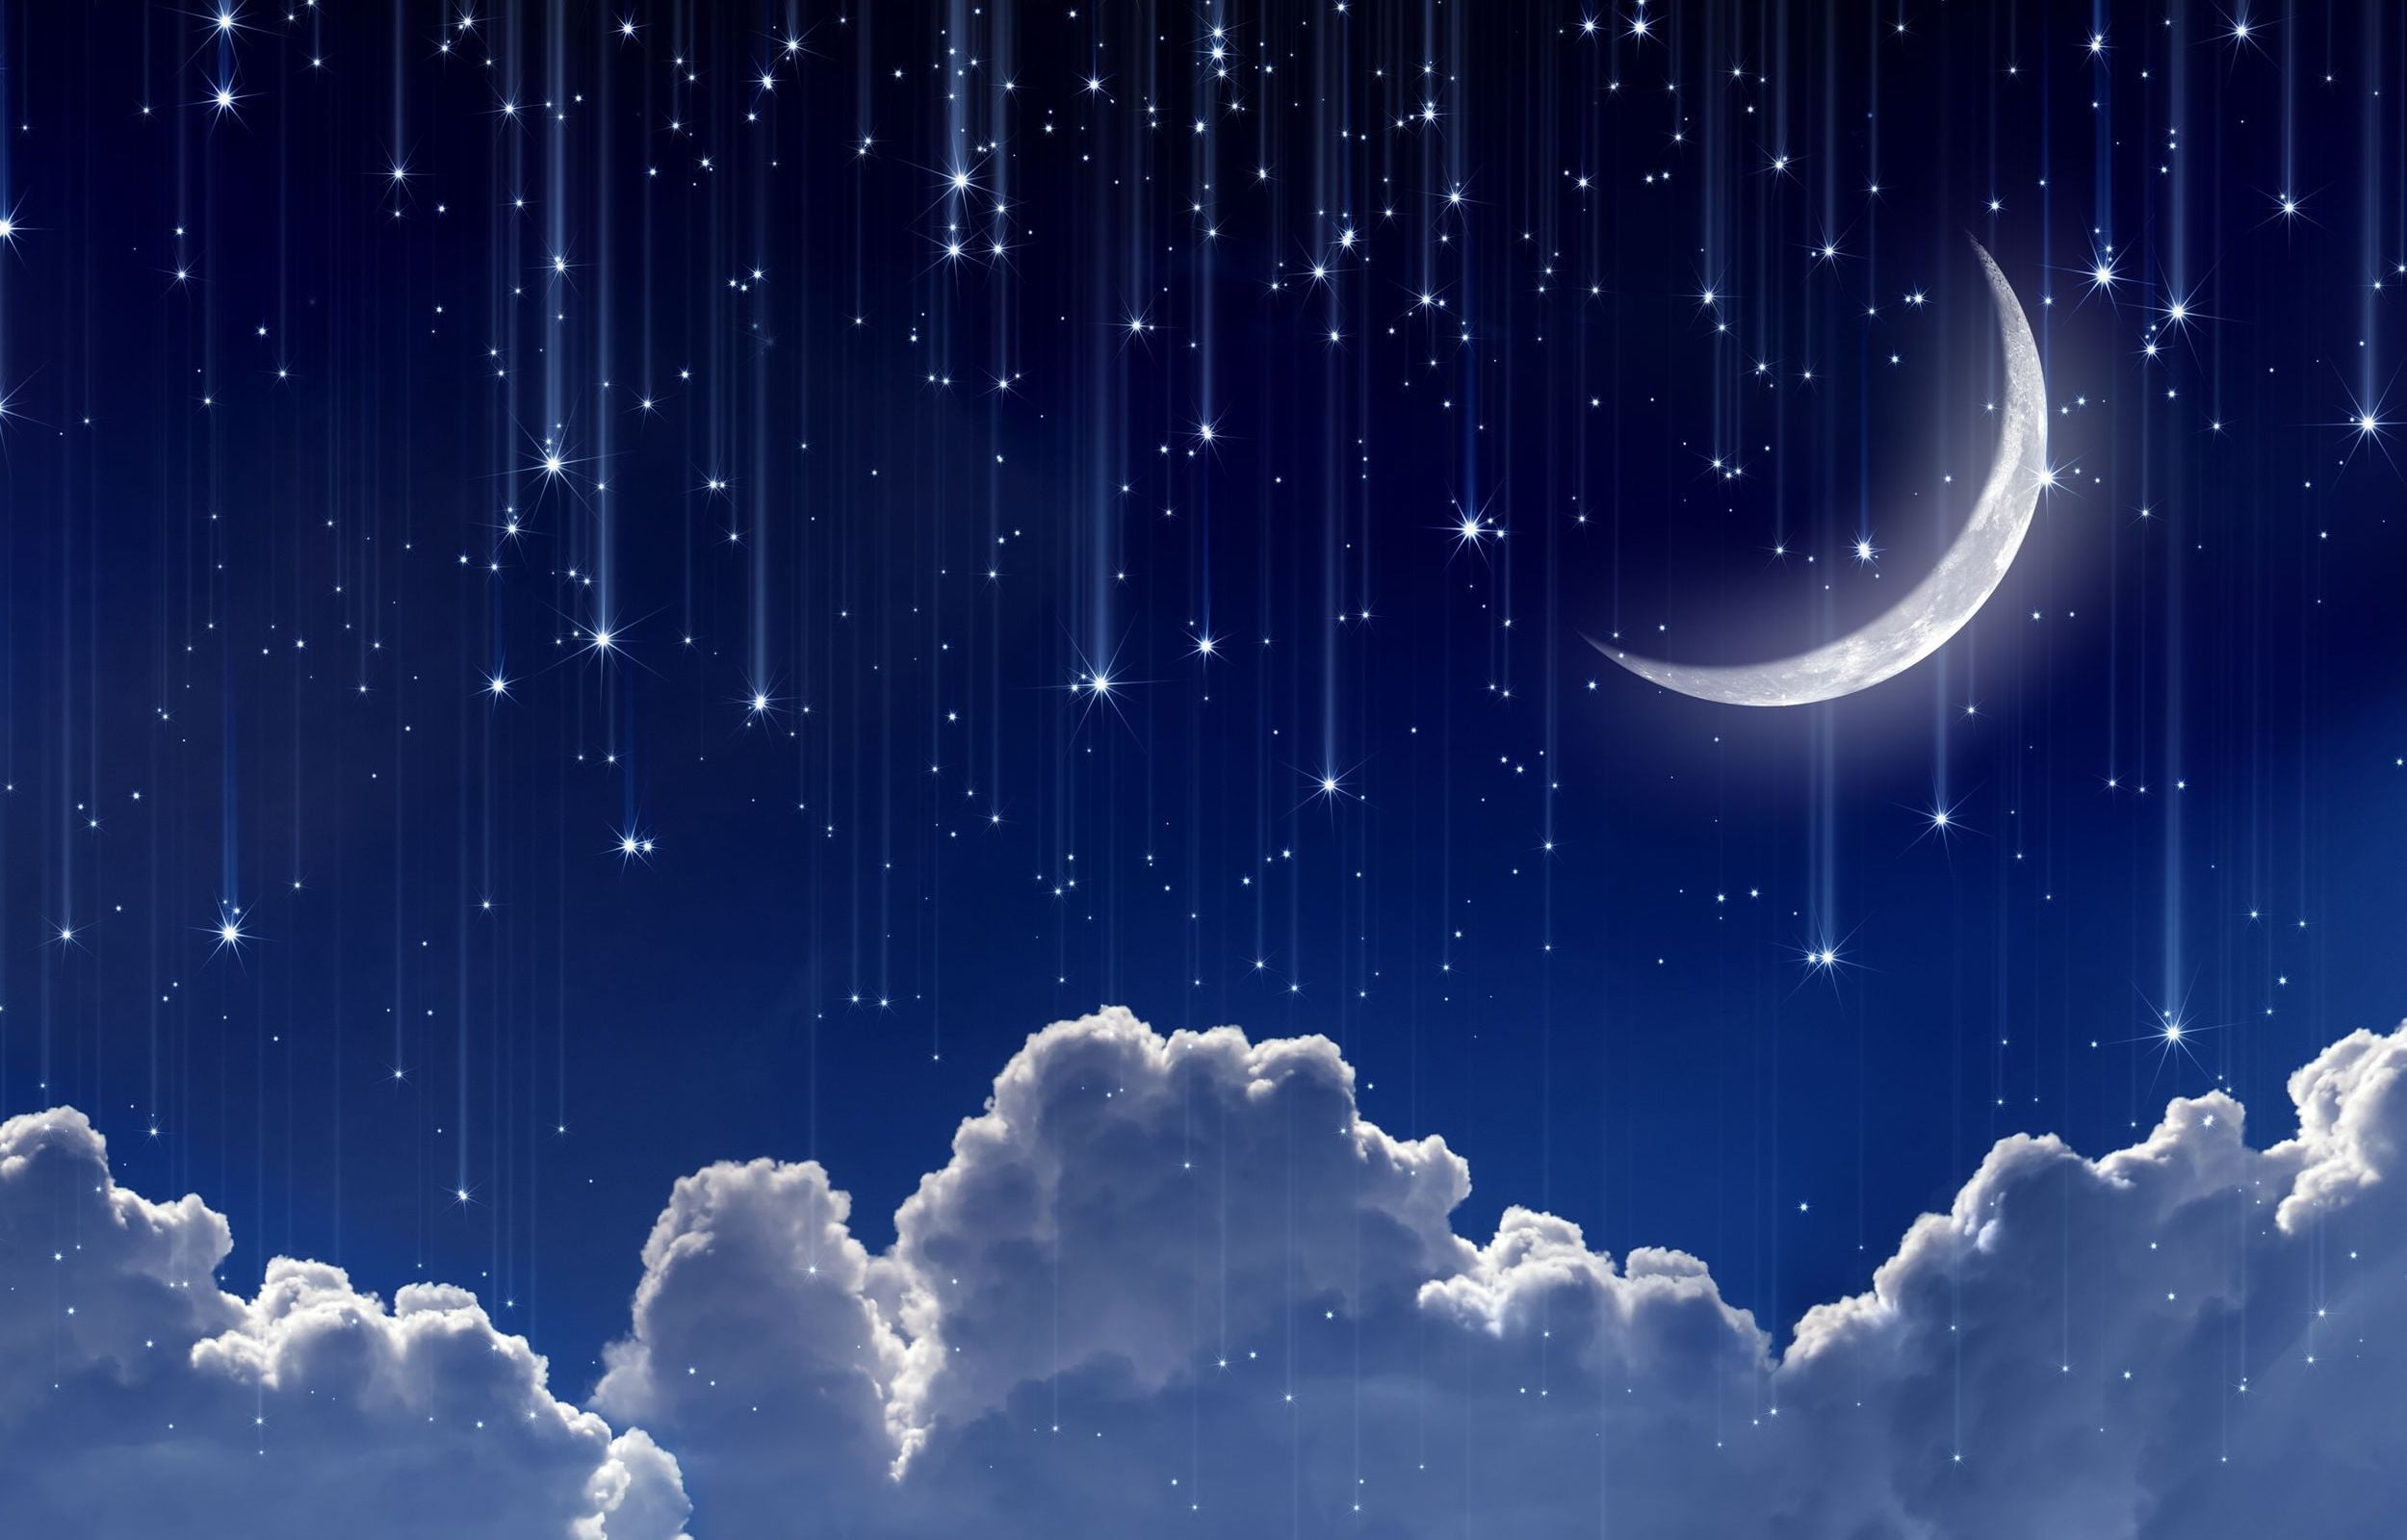 Dreamworks logo, the sky, space, stars, clouds, night, lights